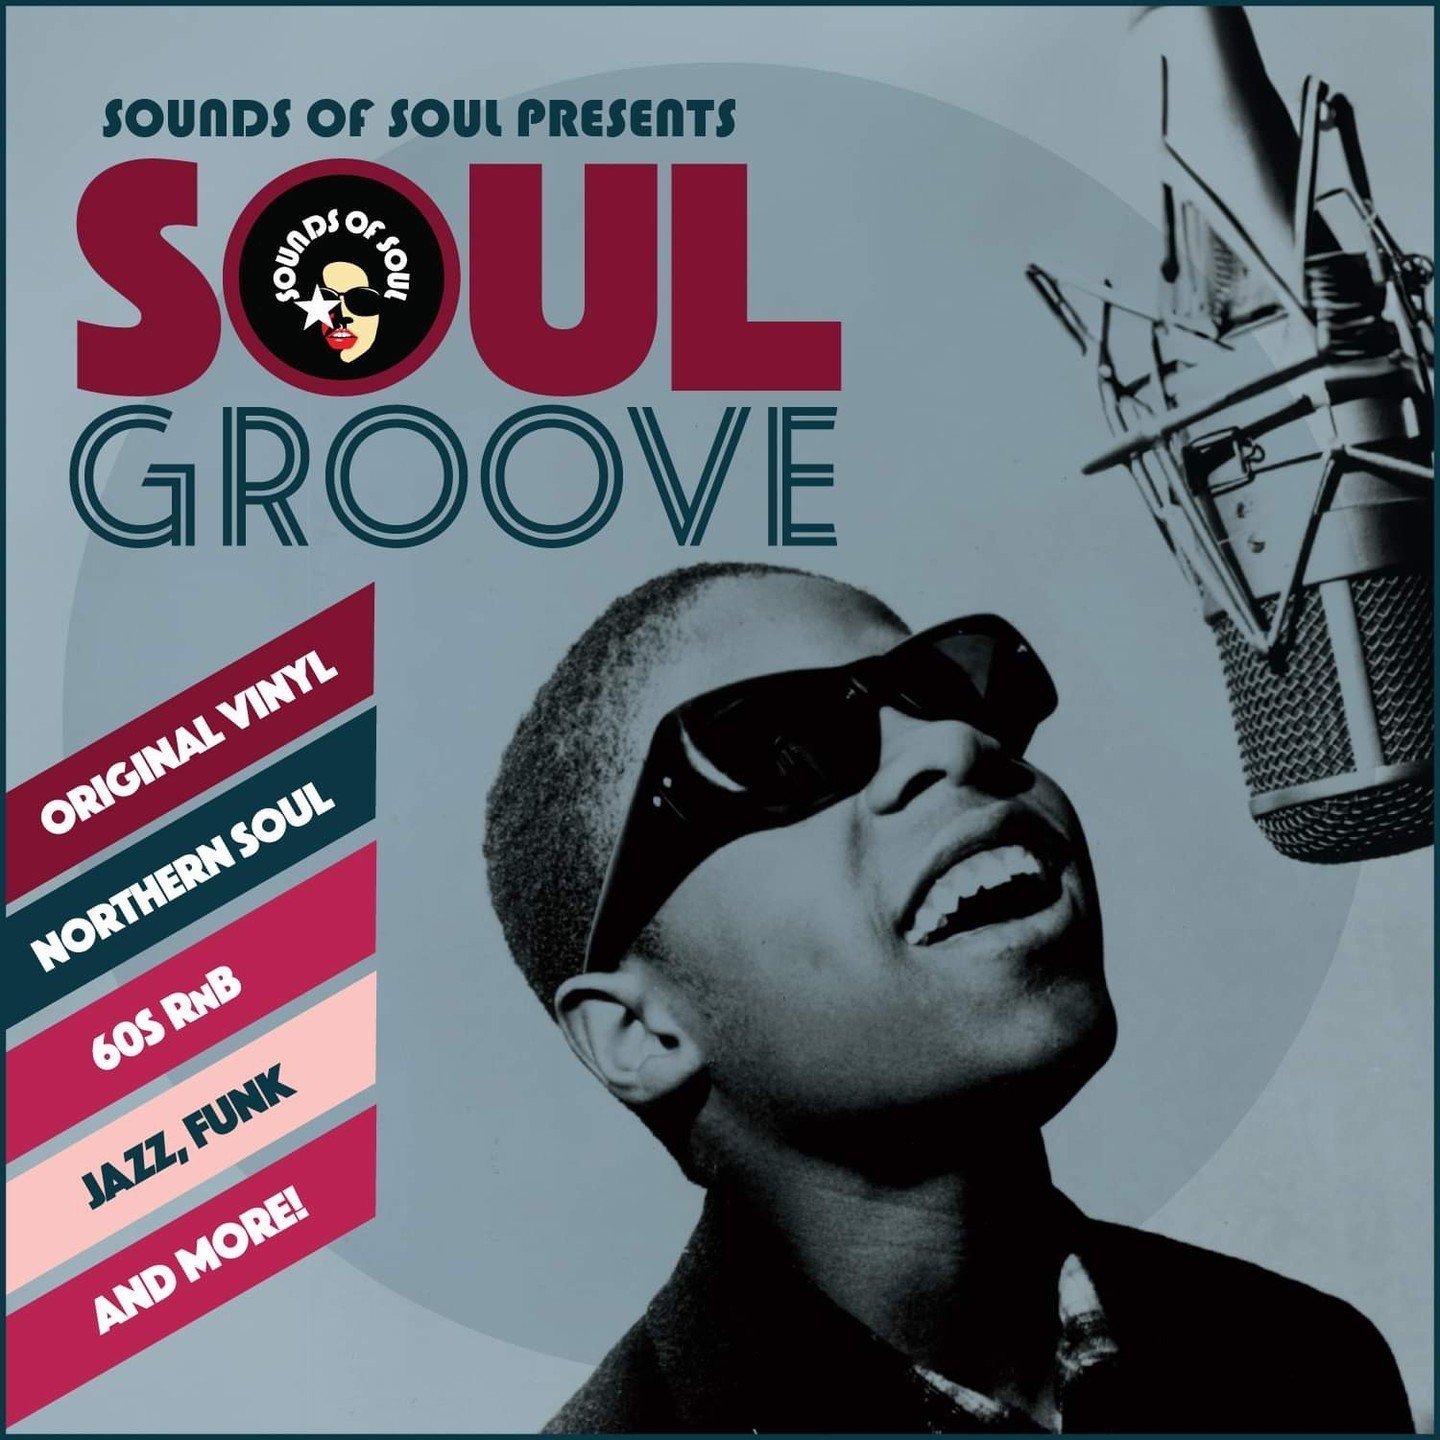 Join us for our debut Soul Groove night in collaboration with @sounds_of_soul_brisbane! 🕺🙌

The team will be spinning 60's RnB, Northern Soul, Funk, Jazz, and more on original vinyl along with special guest Anjee Wegert! ✨

Hurry, 50% of tickets ha